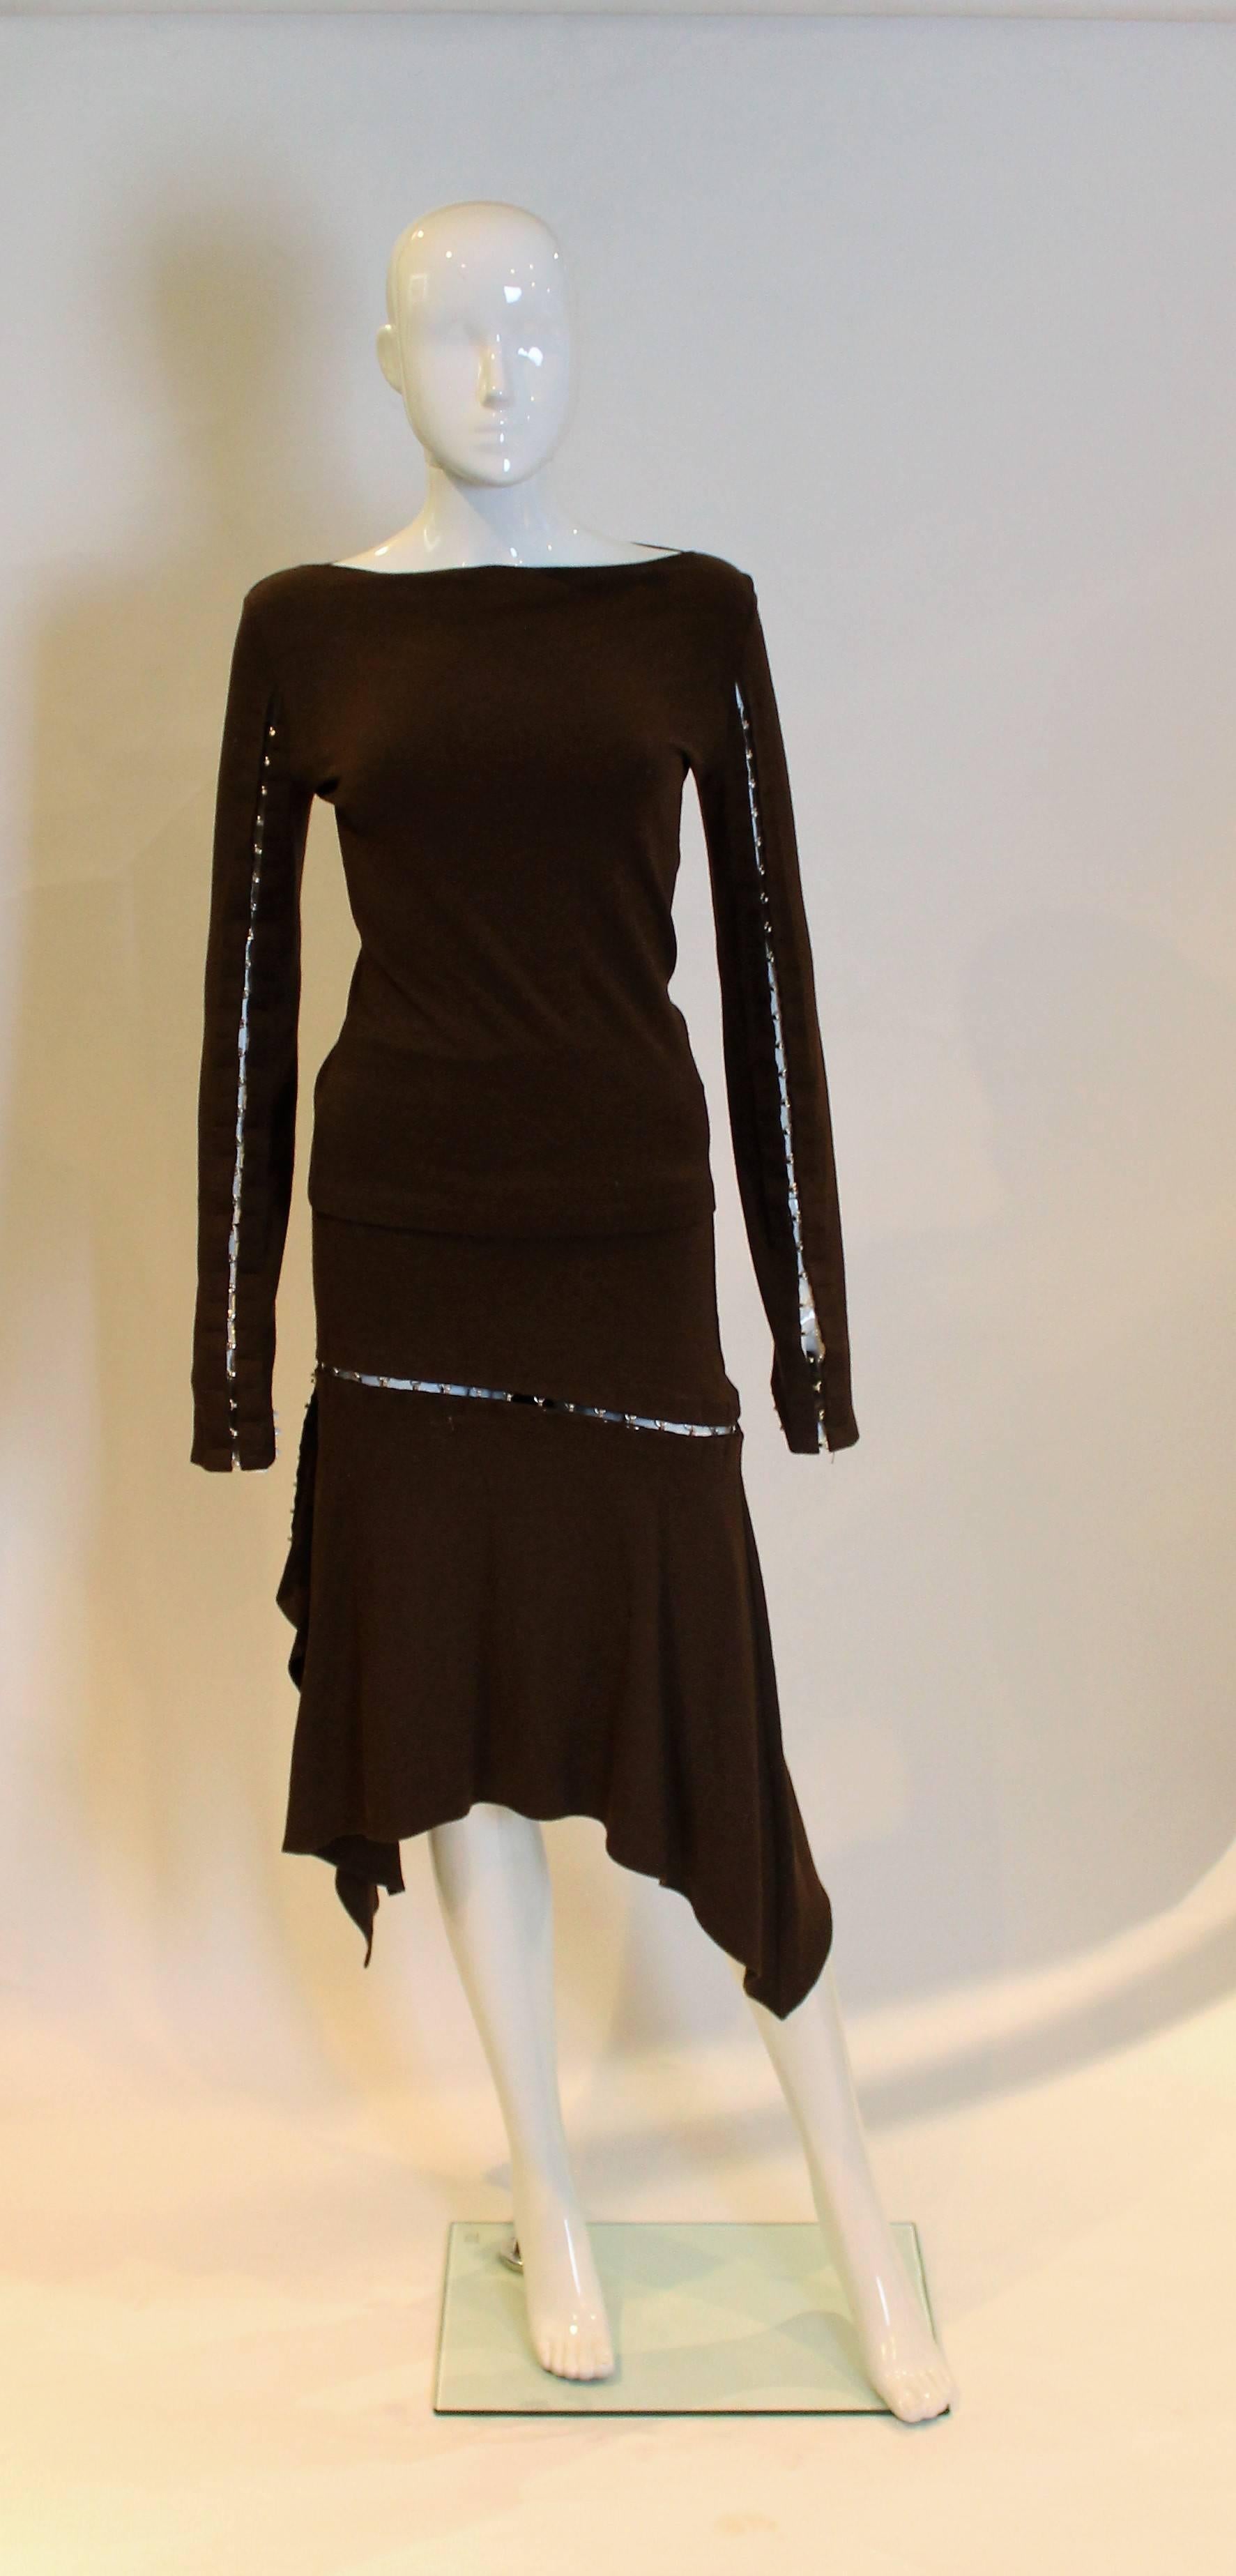 A seriously sexy outfit from Plein Sud. The top has a  slash neckline with hook and eye opening along the sleeves. The skirt has a row of hooks and eyes running from the right hand side and front and back of the skirt.
Top:Bust 33'',length 21''